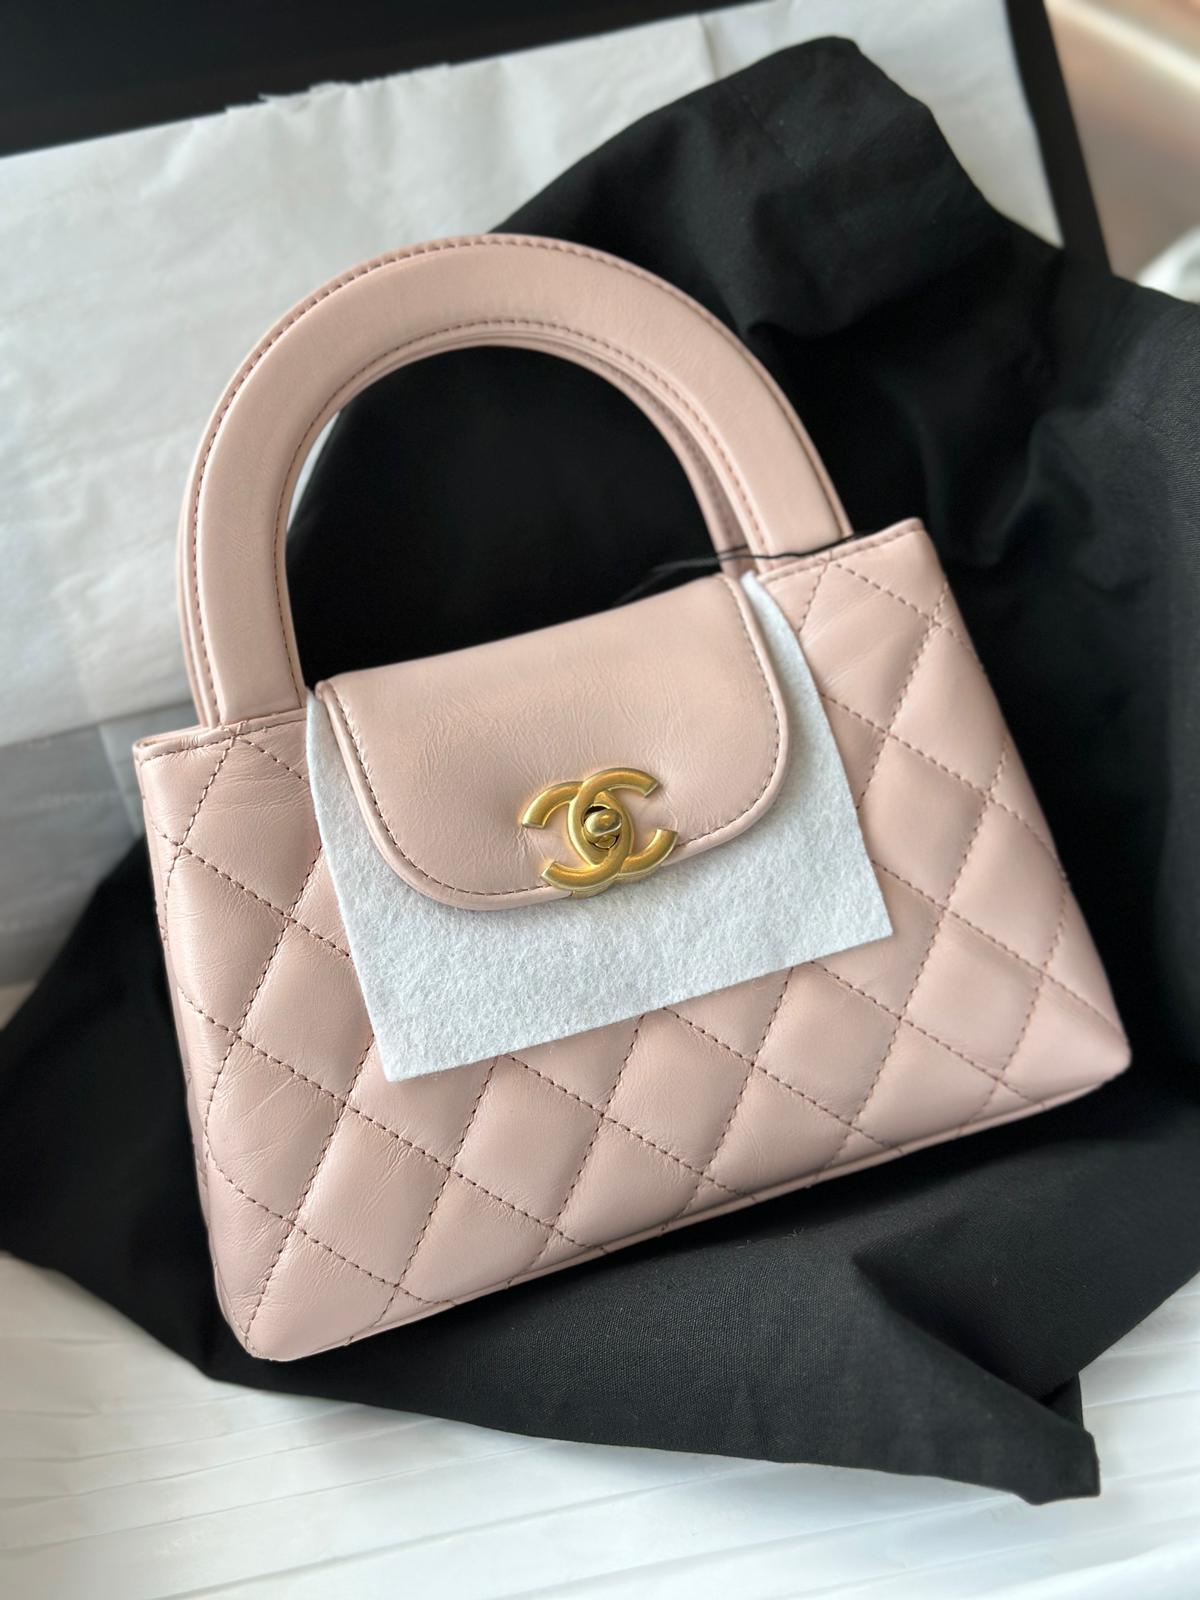 price of chanel gabrielle bag